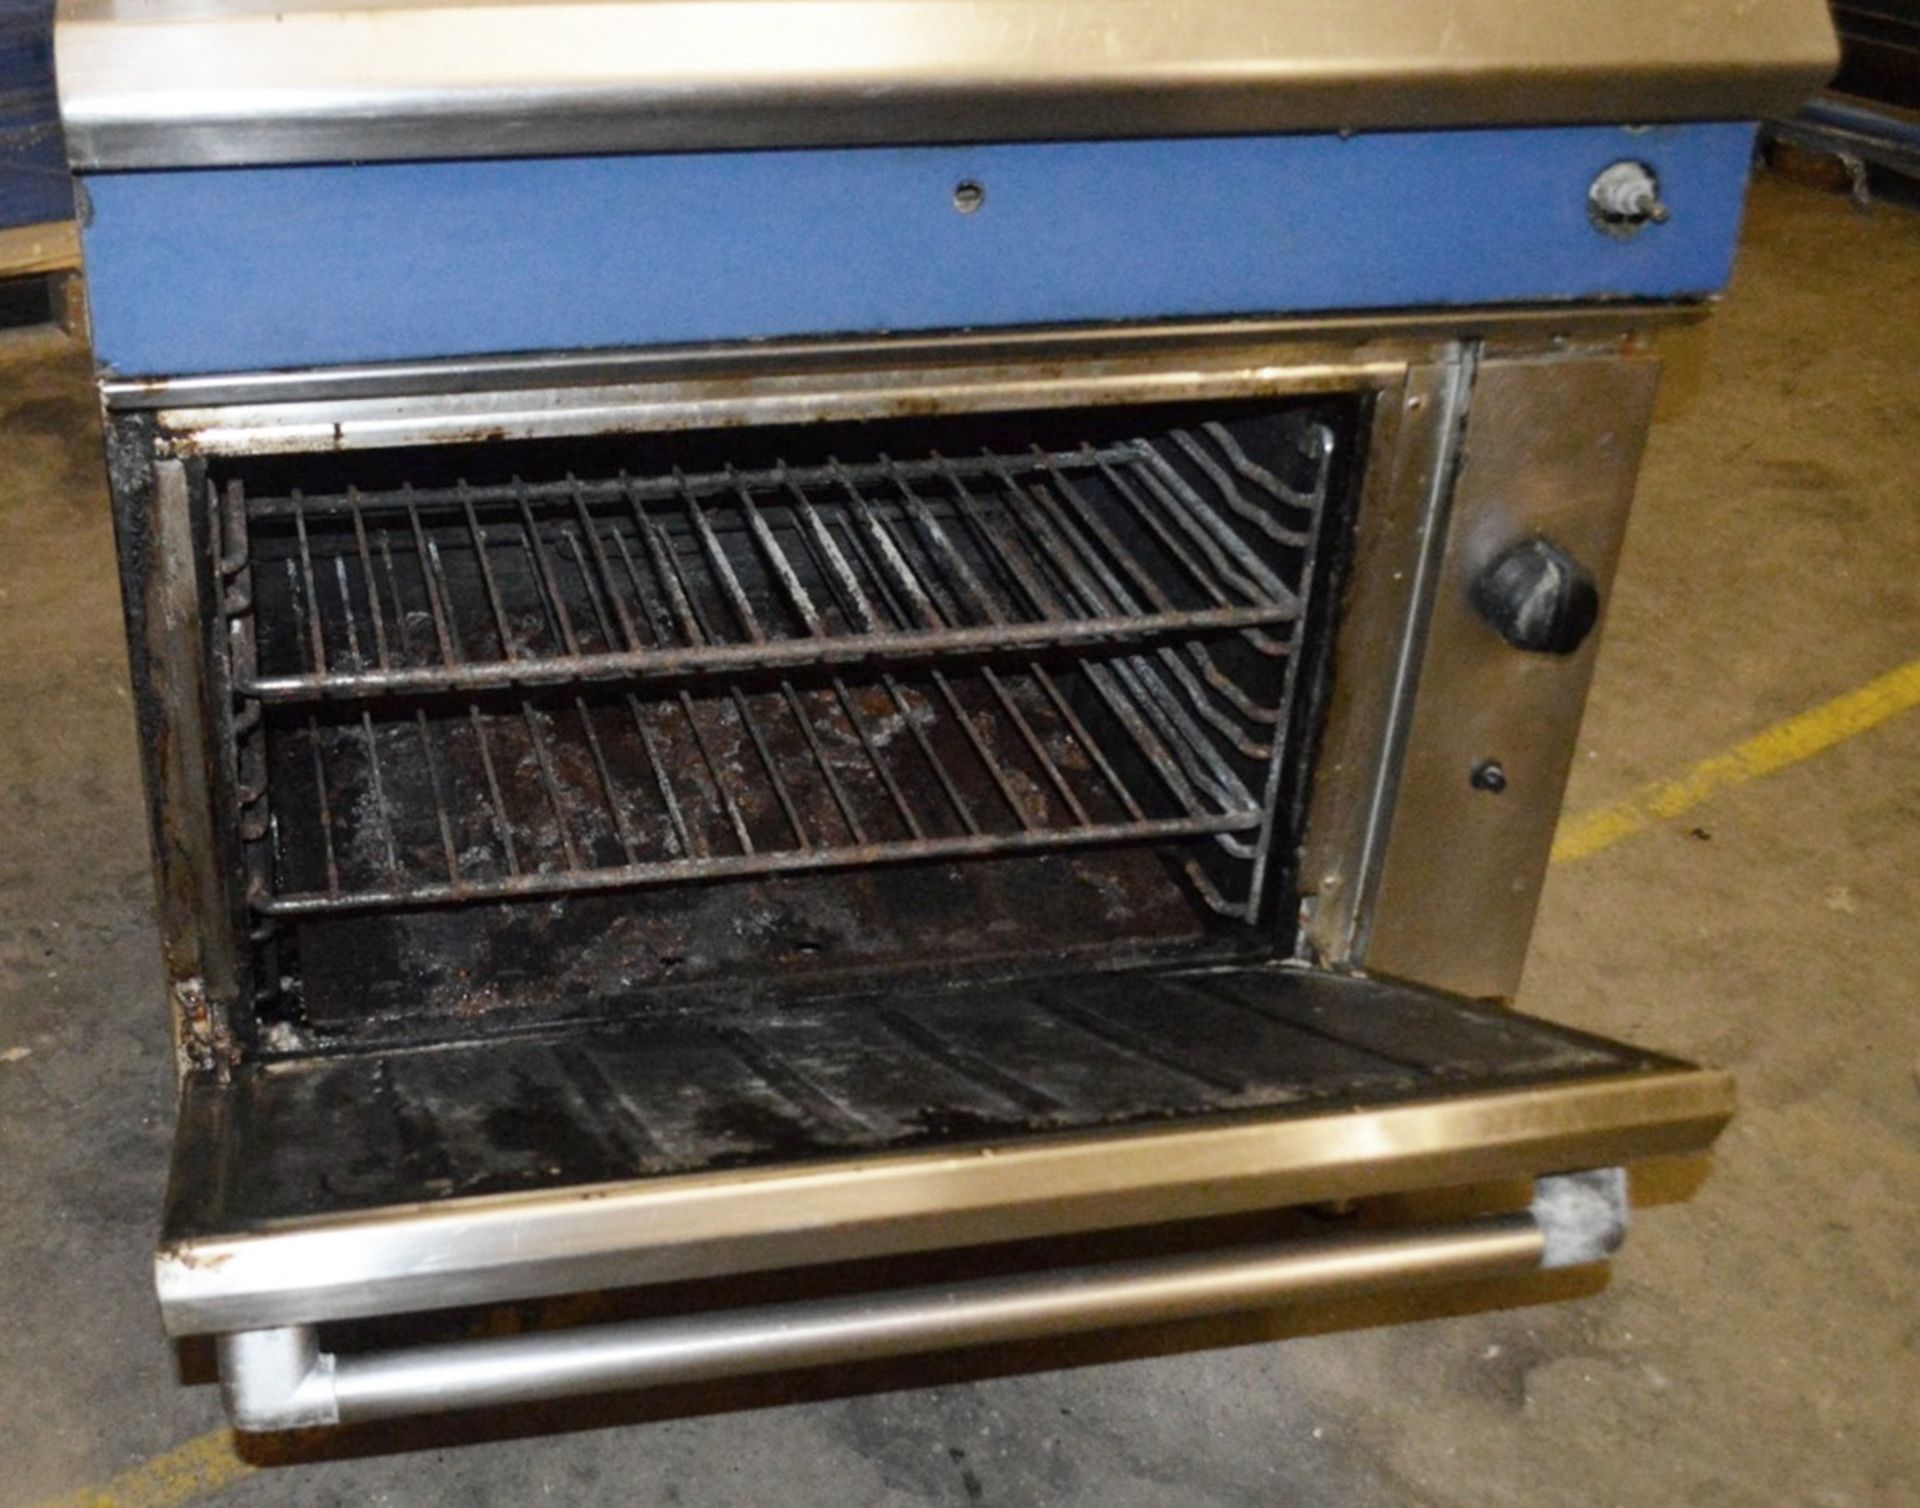 1 x Commercial Natural Gas Solid Top Range In Stainless Steel - Ref: J1566 - Low Start, No Reserve - Image 3 of 5